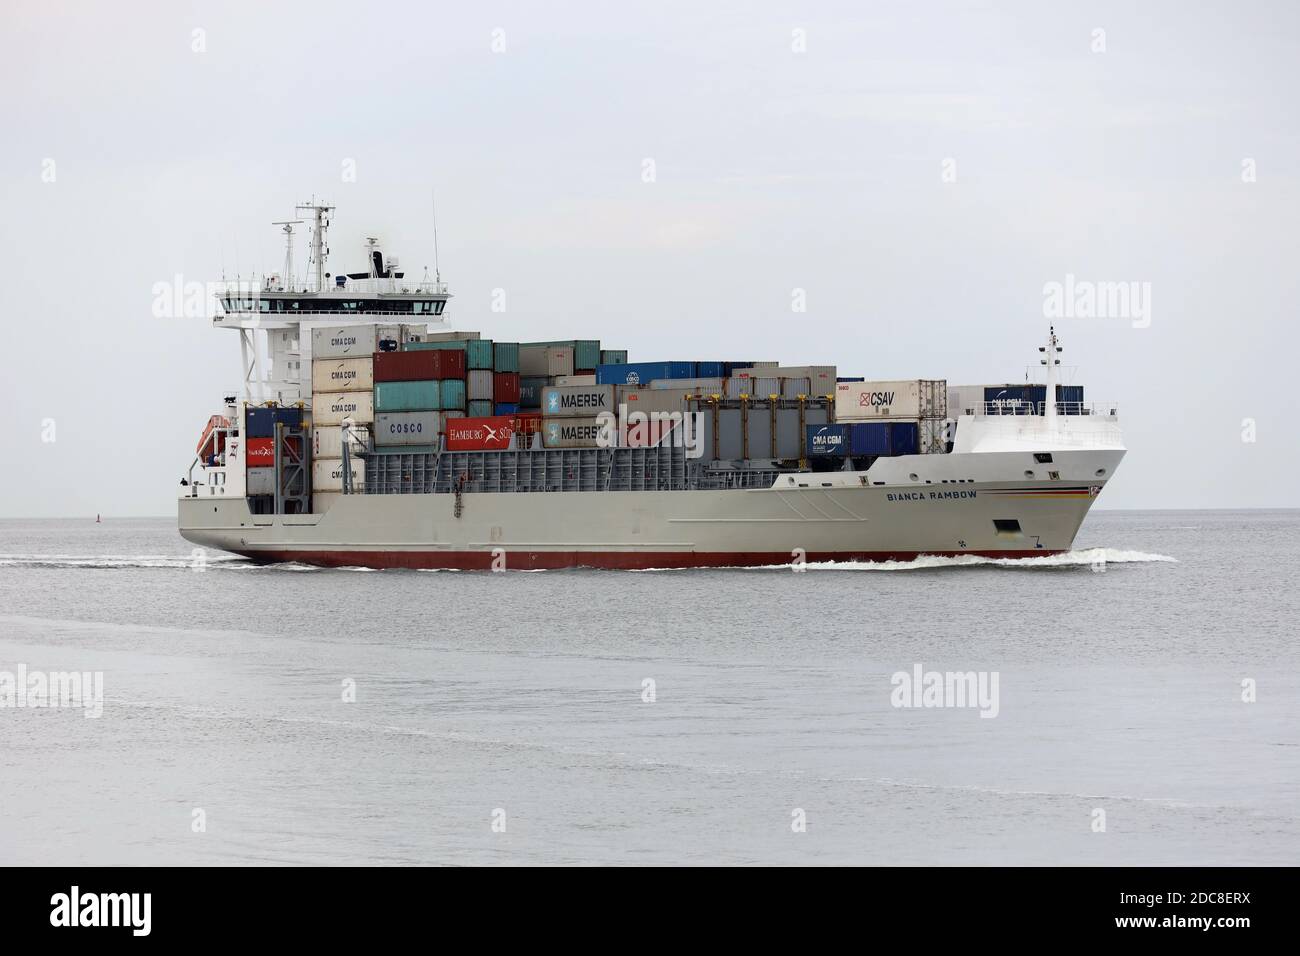 The container ship Bianca Rambow will pass the city of Cuxhaven on the river Elbe on August 20, 2020 on its way to the Kiel Canal. Stock Photo